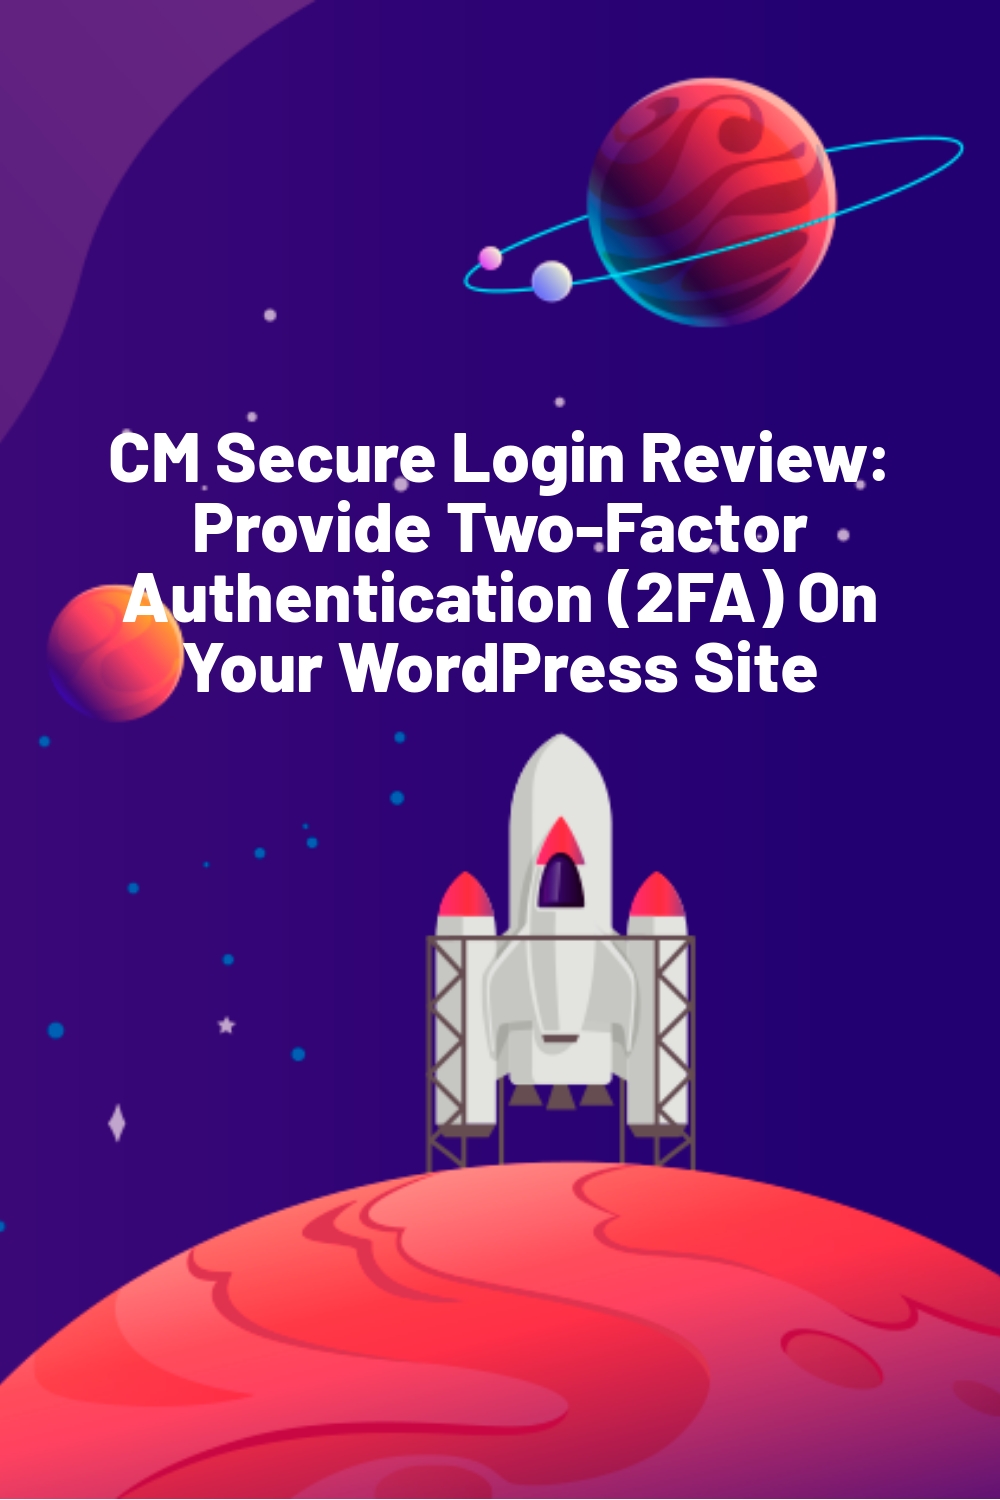 CM Secure Login Review: Provide Two-Factor Authentication (2FA) On Your WordPress Site